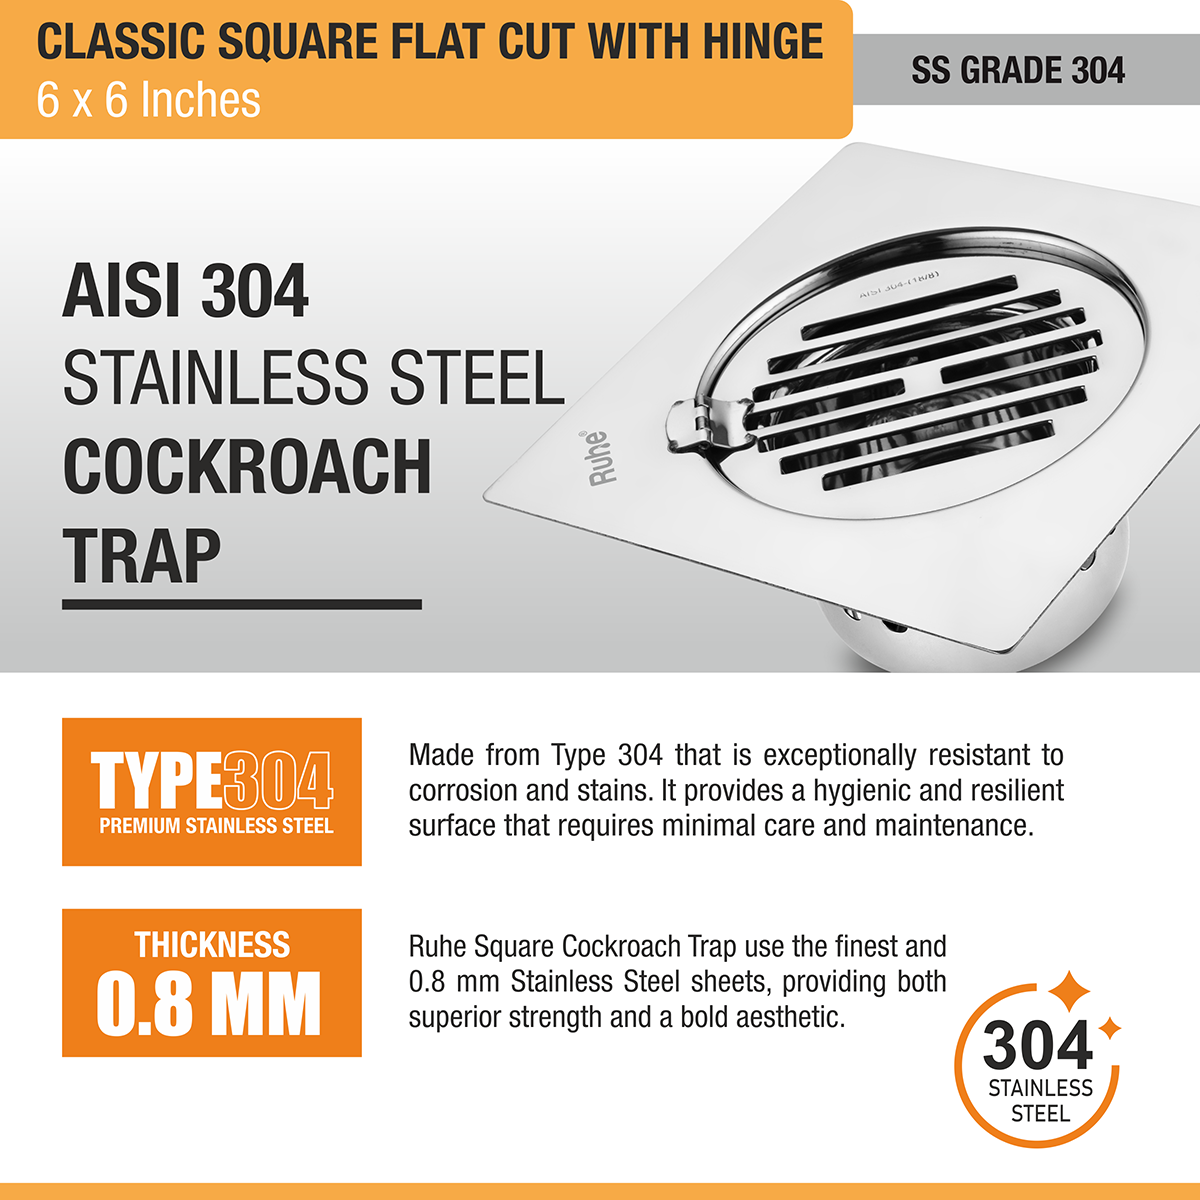 Classic Square Flat Cut Floor Drain (6 x 6 Inches) with Hinge & Cockroach Trap (304 Grade) stainless steel